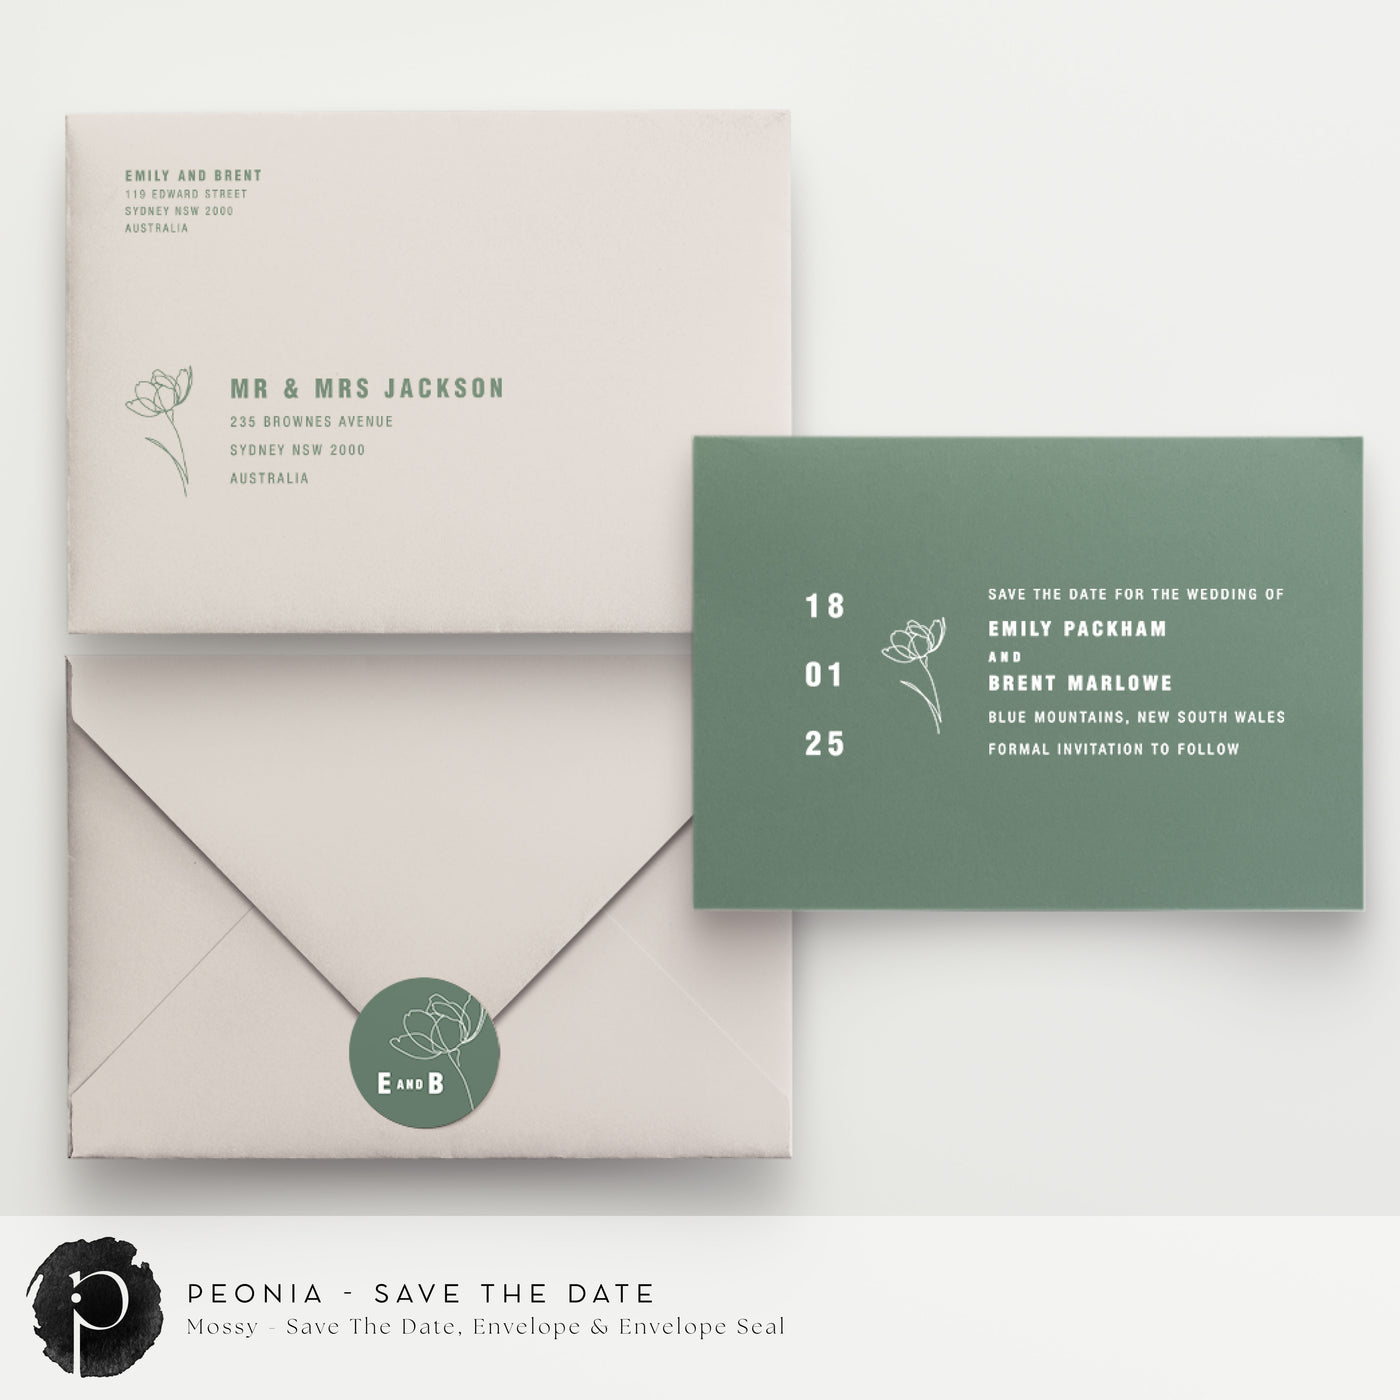 Peonia - Save The Date Cards